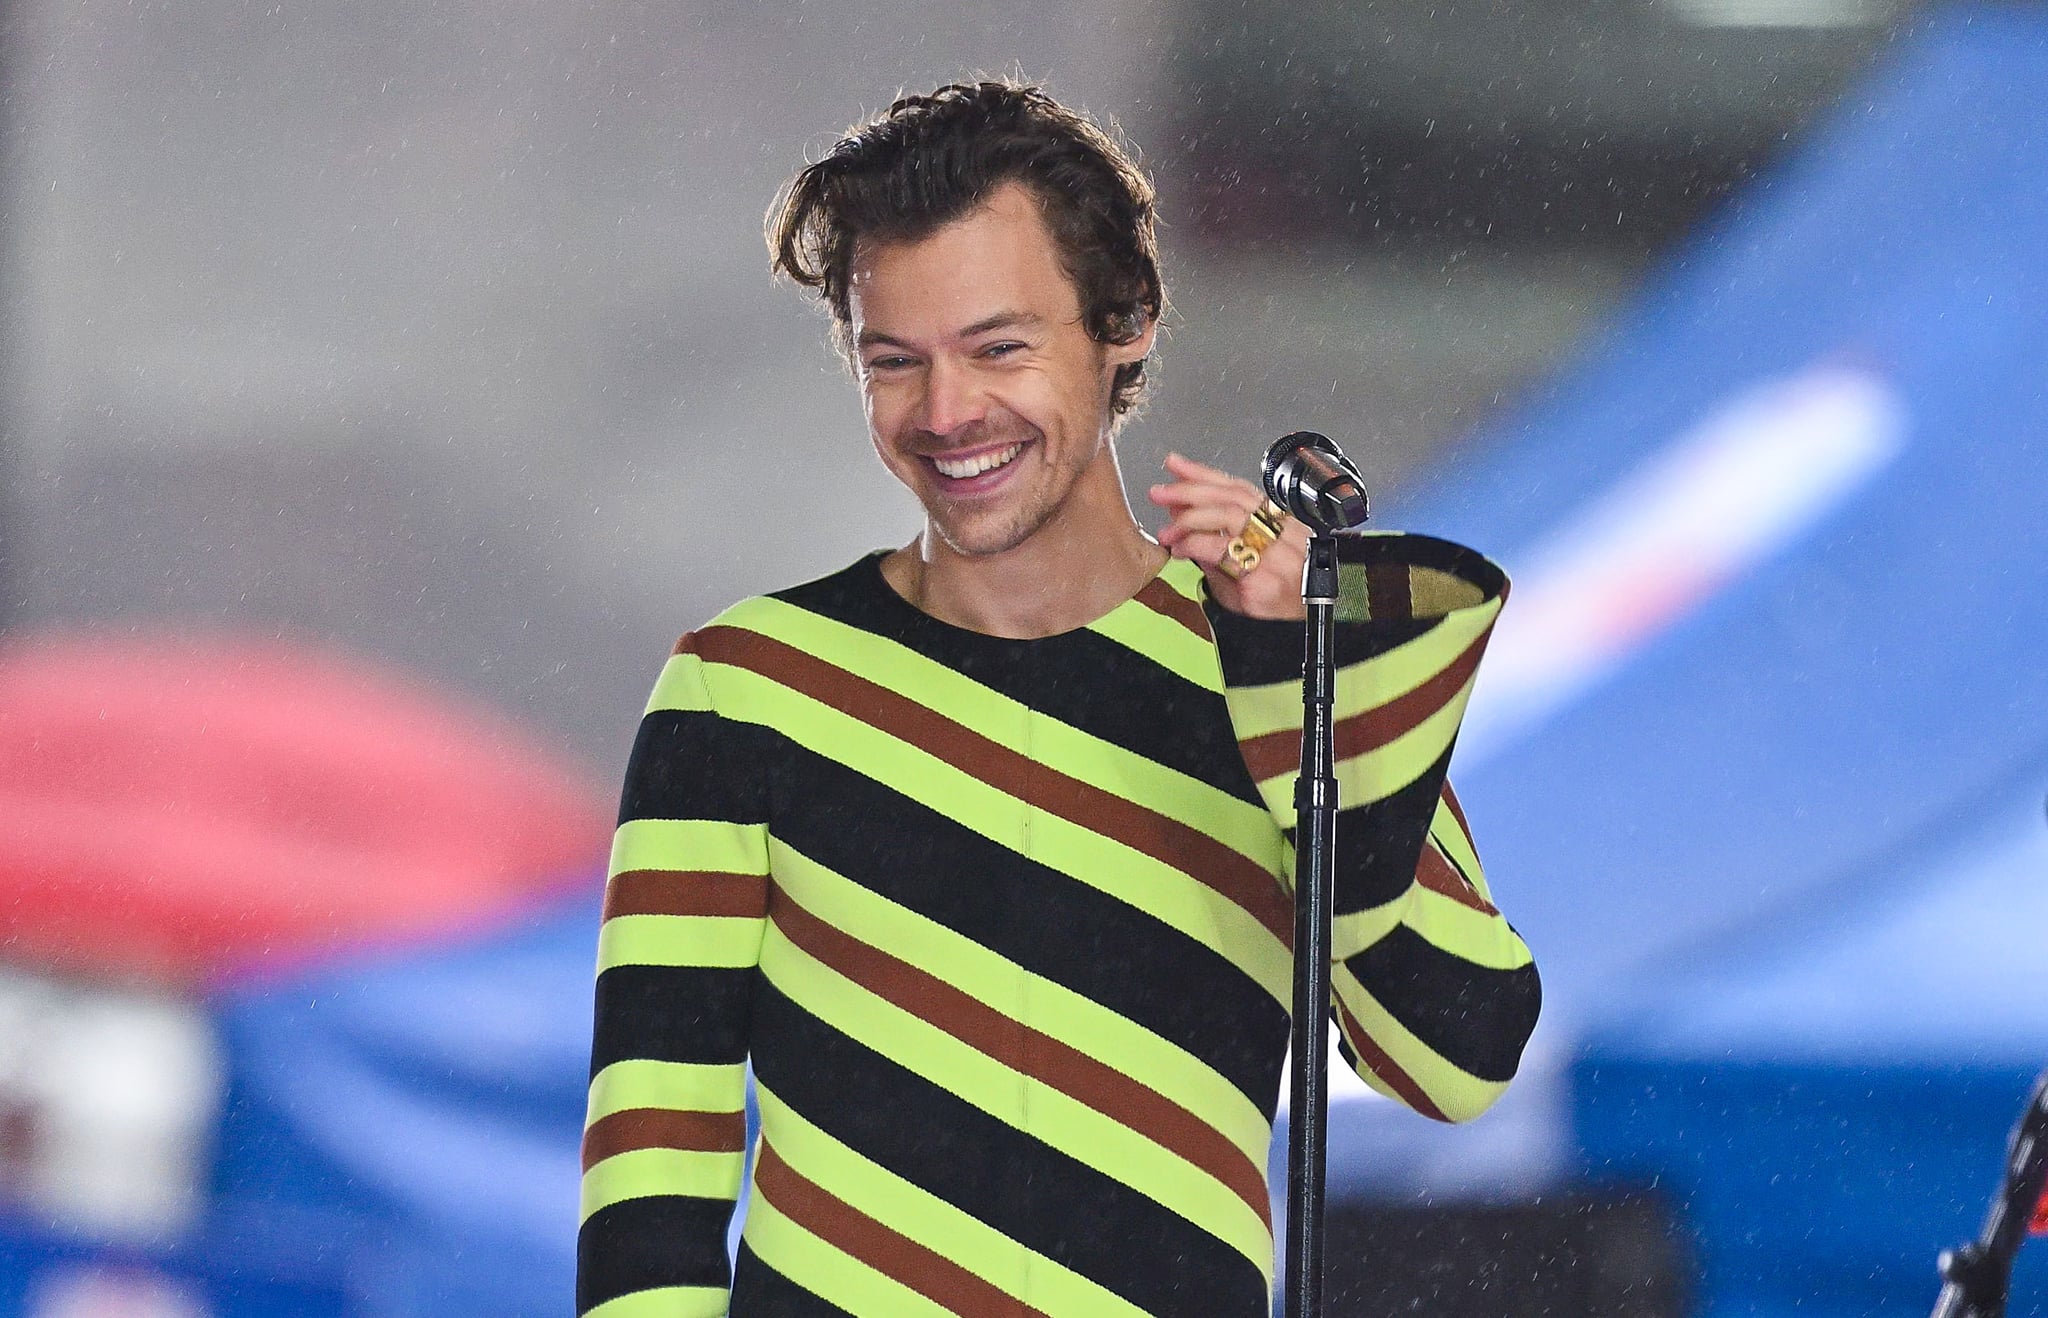 NEW YORK, NEW YORK - MAY 19: Harry Styles performs on NBC's 'Today' show at Rockefeller Center on May 19, 2022 in New York City. (Photo by James Devaney/GC Images)